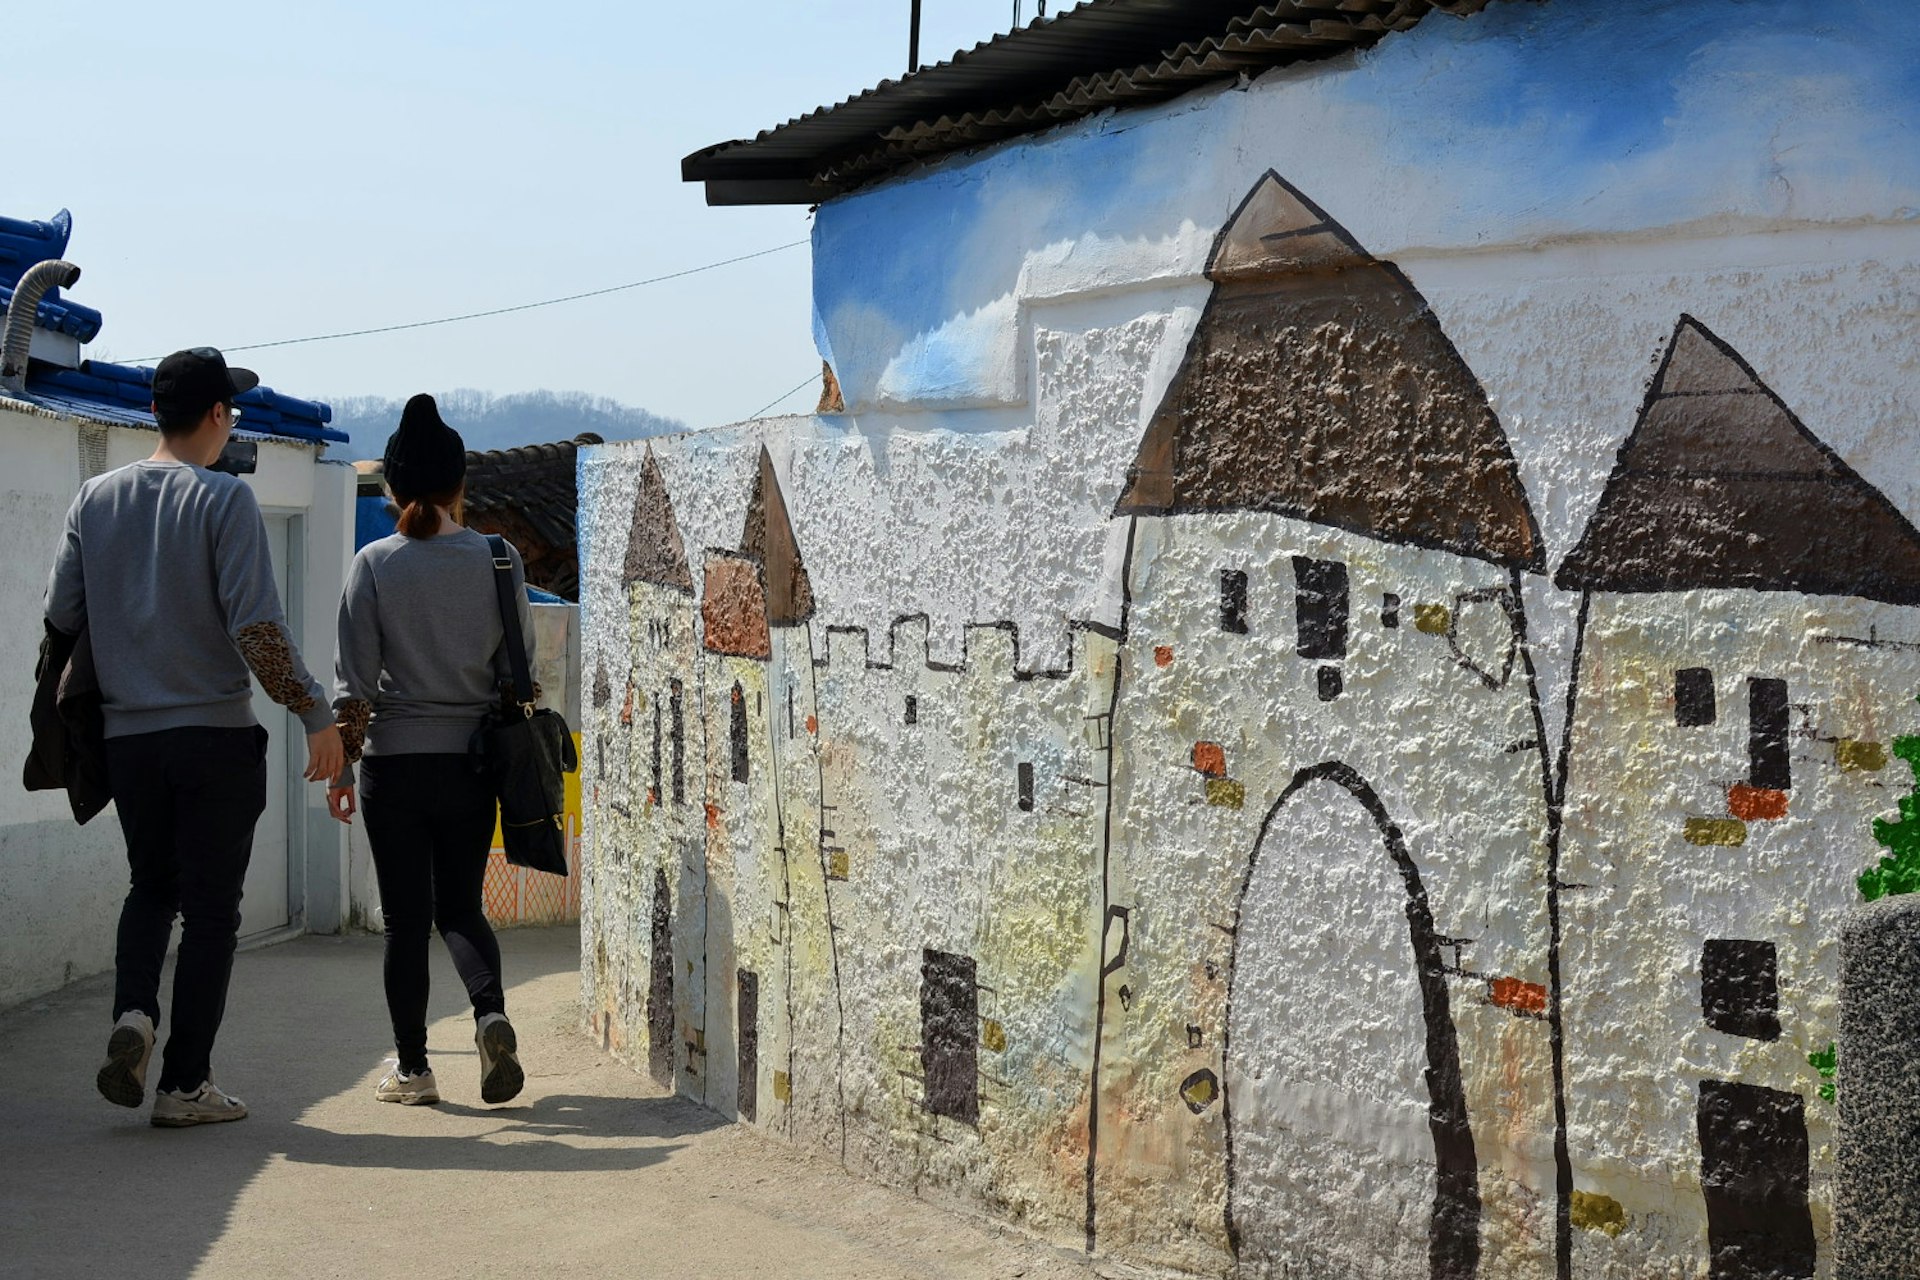 Murals of Jaman Art Village are great for an afternoon wander. Image by Rebecca Milner / Lonely Planet